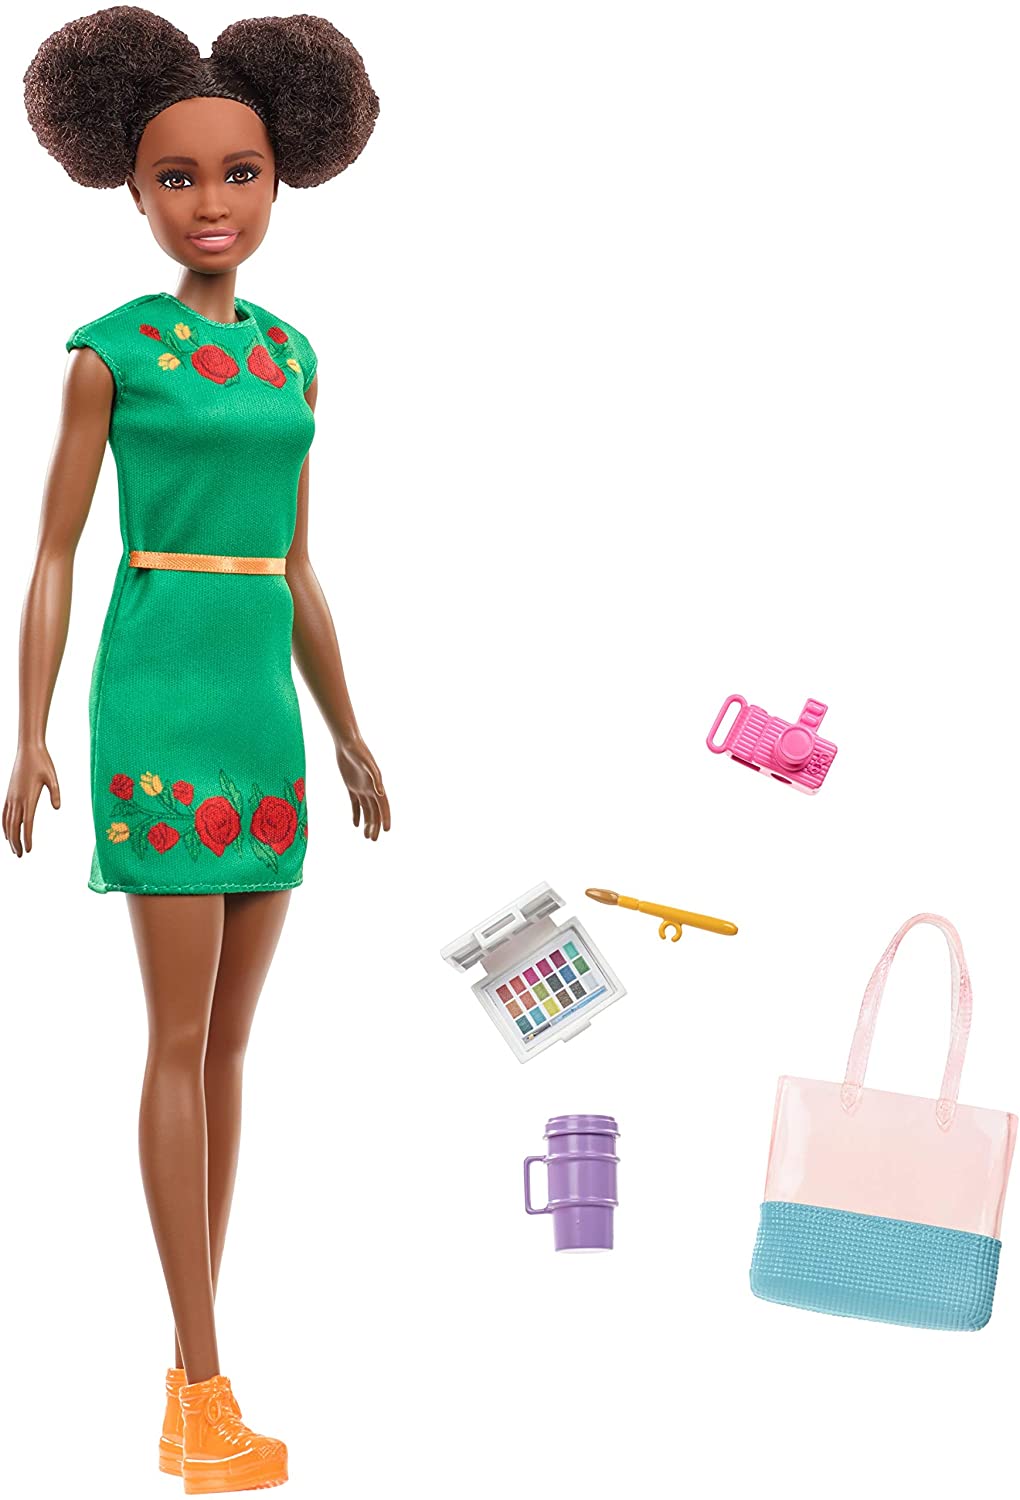 ''BARBIE Travel Nikki Doll, Kitty Ear Brunette Hair, with 5 Accessories Including A Camera and Tote B